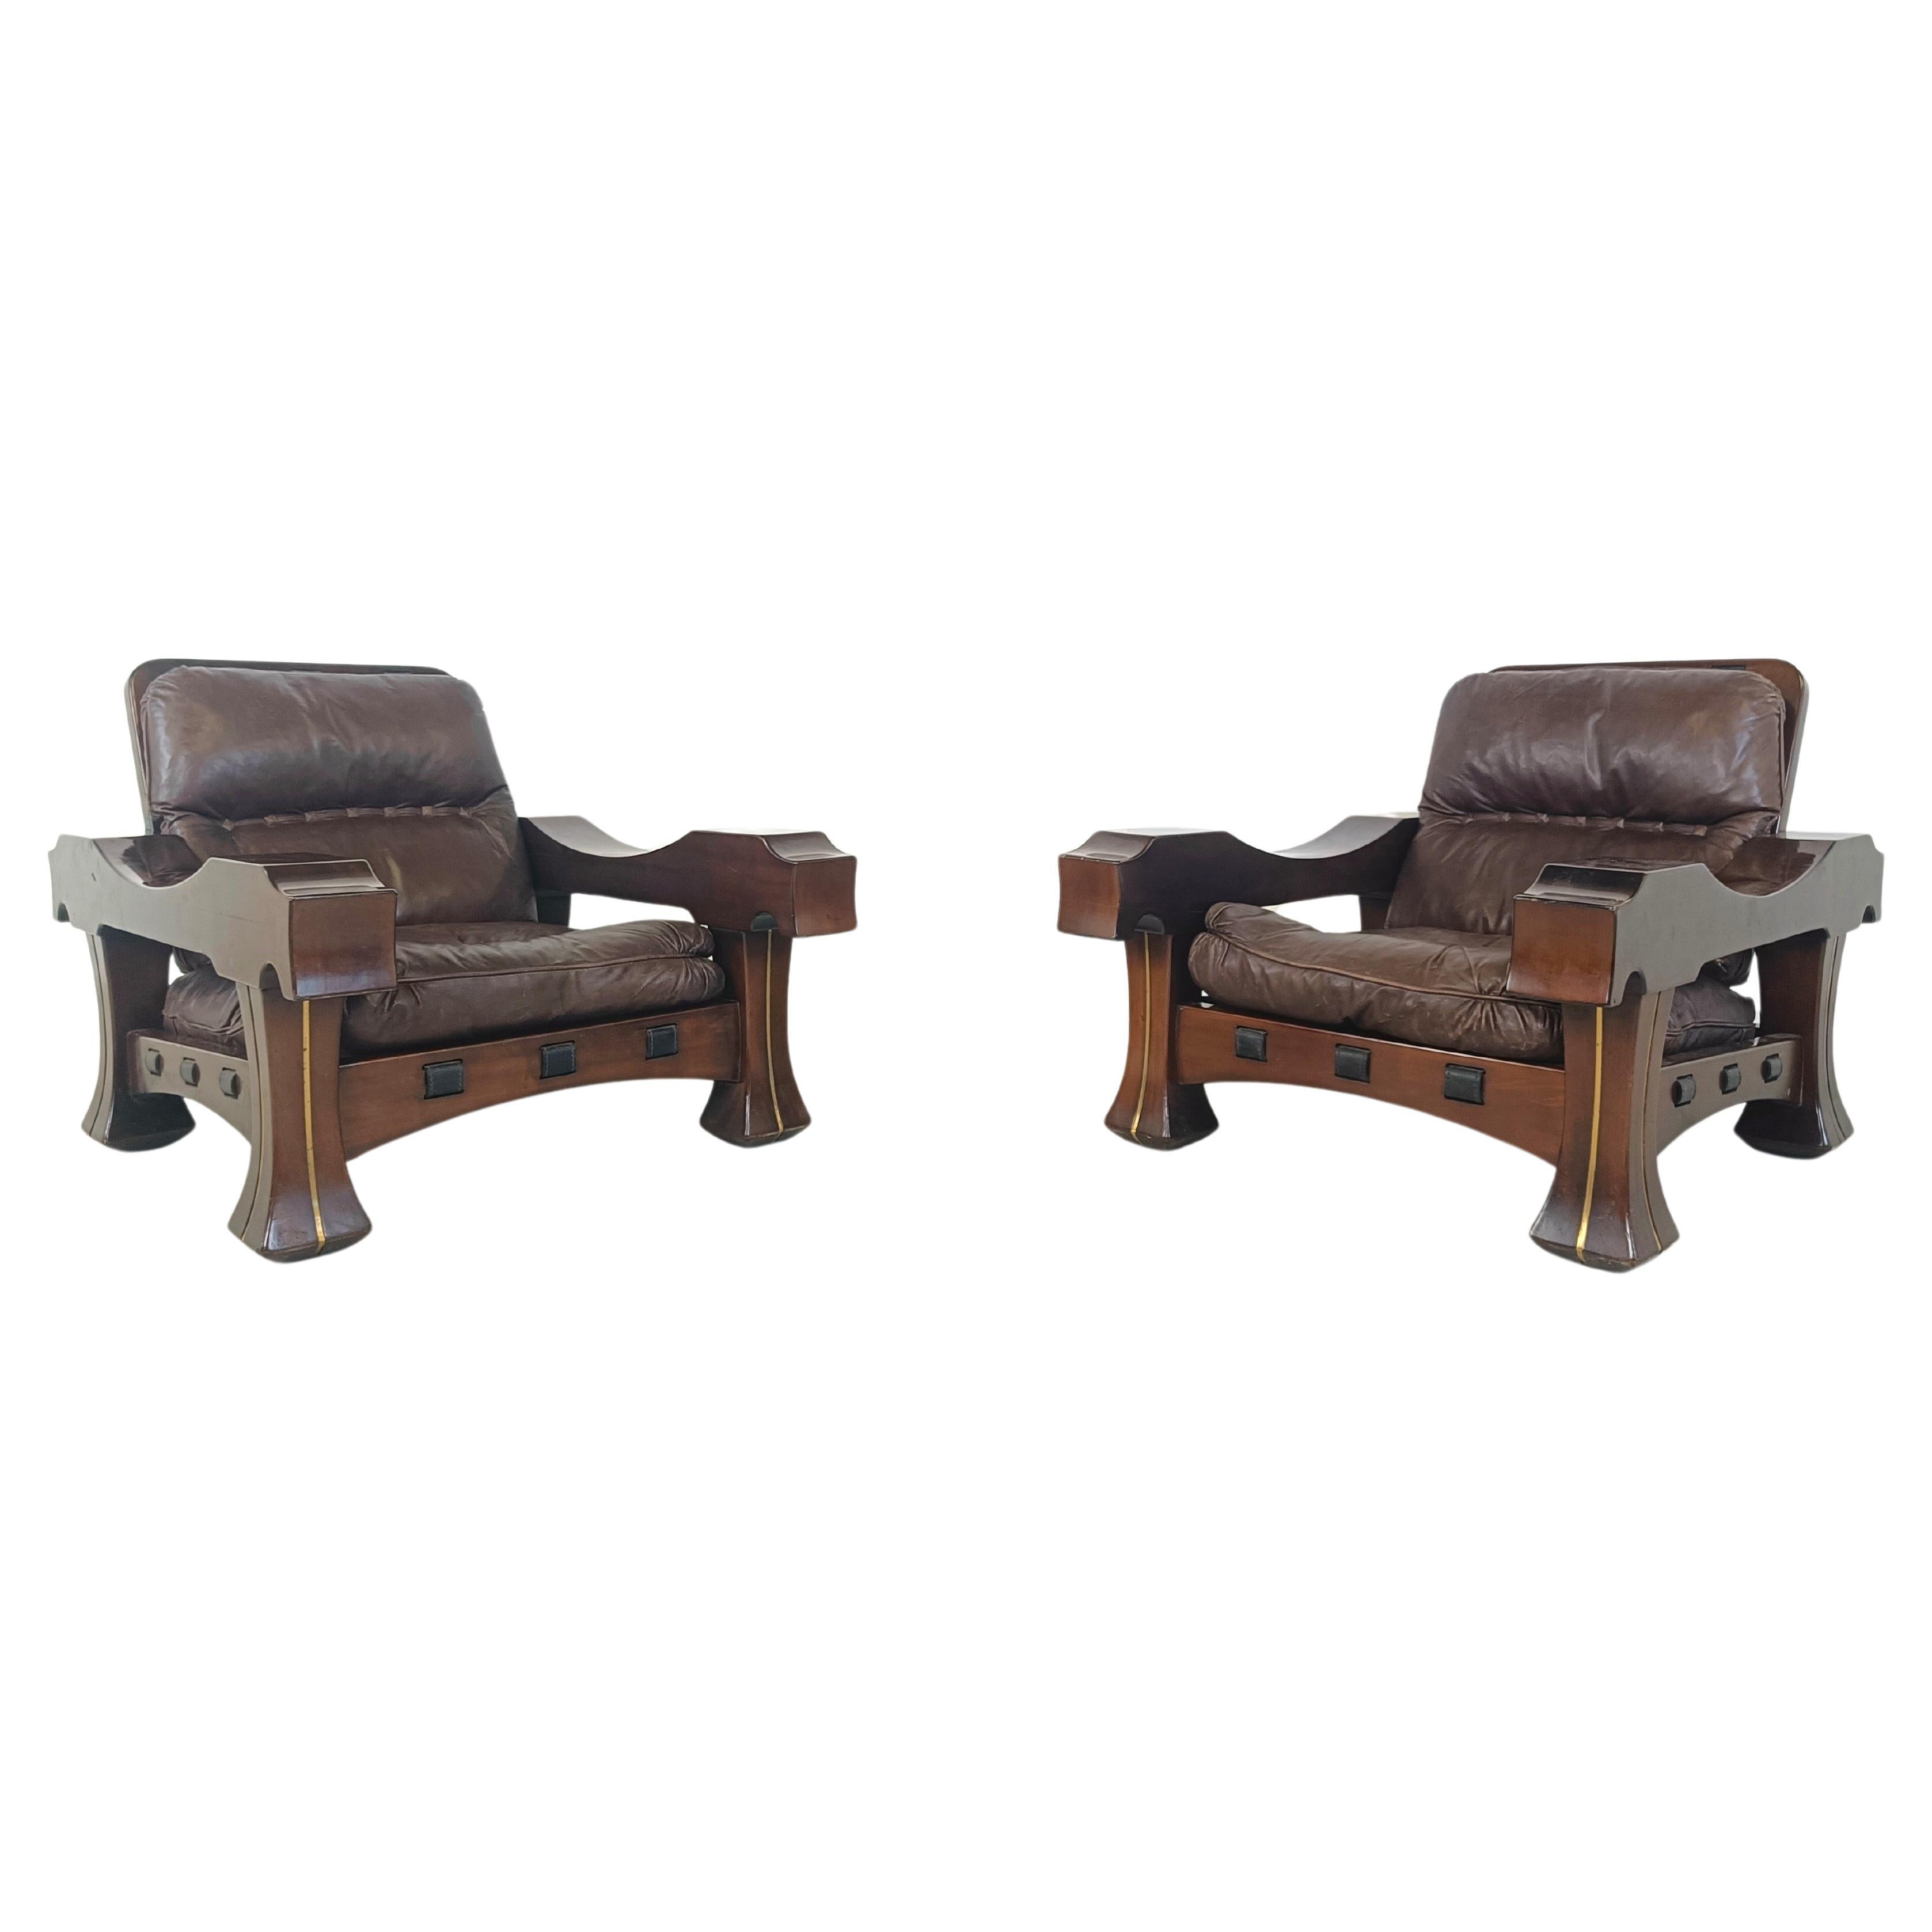 Pair of Ussaro model armchairs by Luciano Frigerio, 1960s For Sale